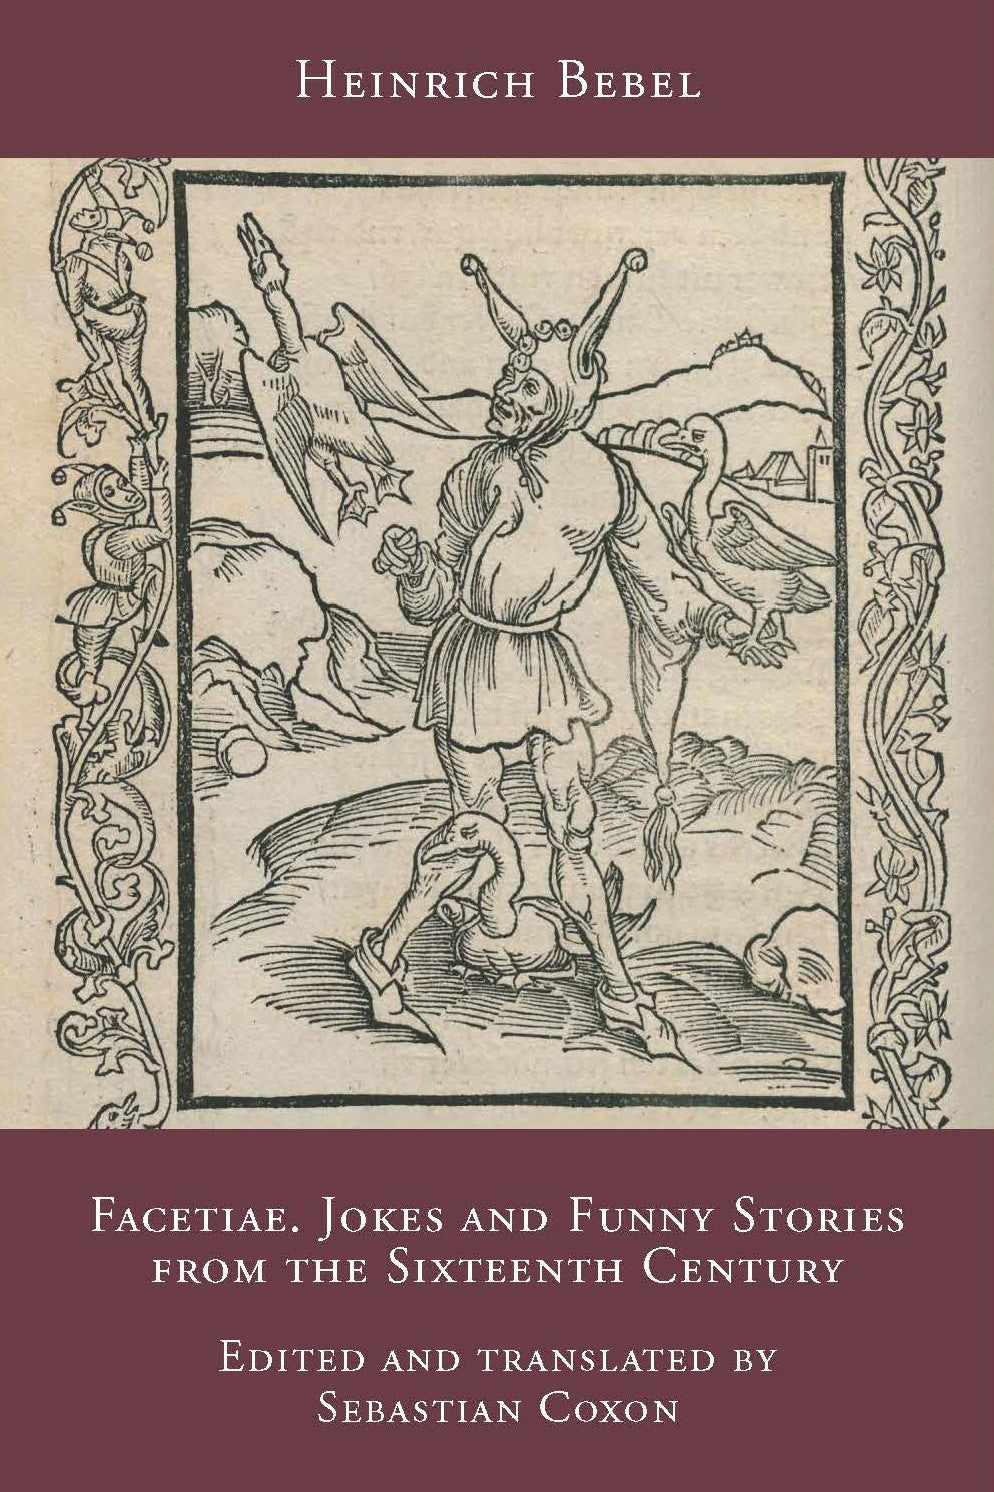 Heinrich Bebel, Facetiae. Jokes and Funny Stories from the Sixteenth Century